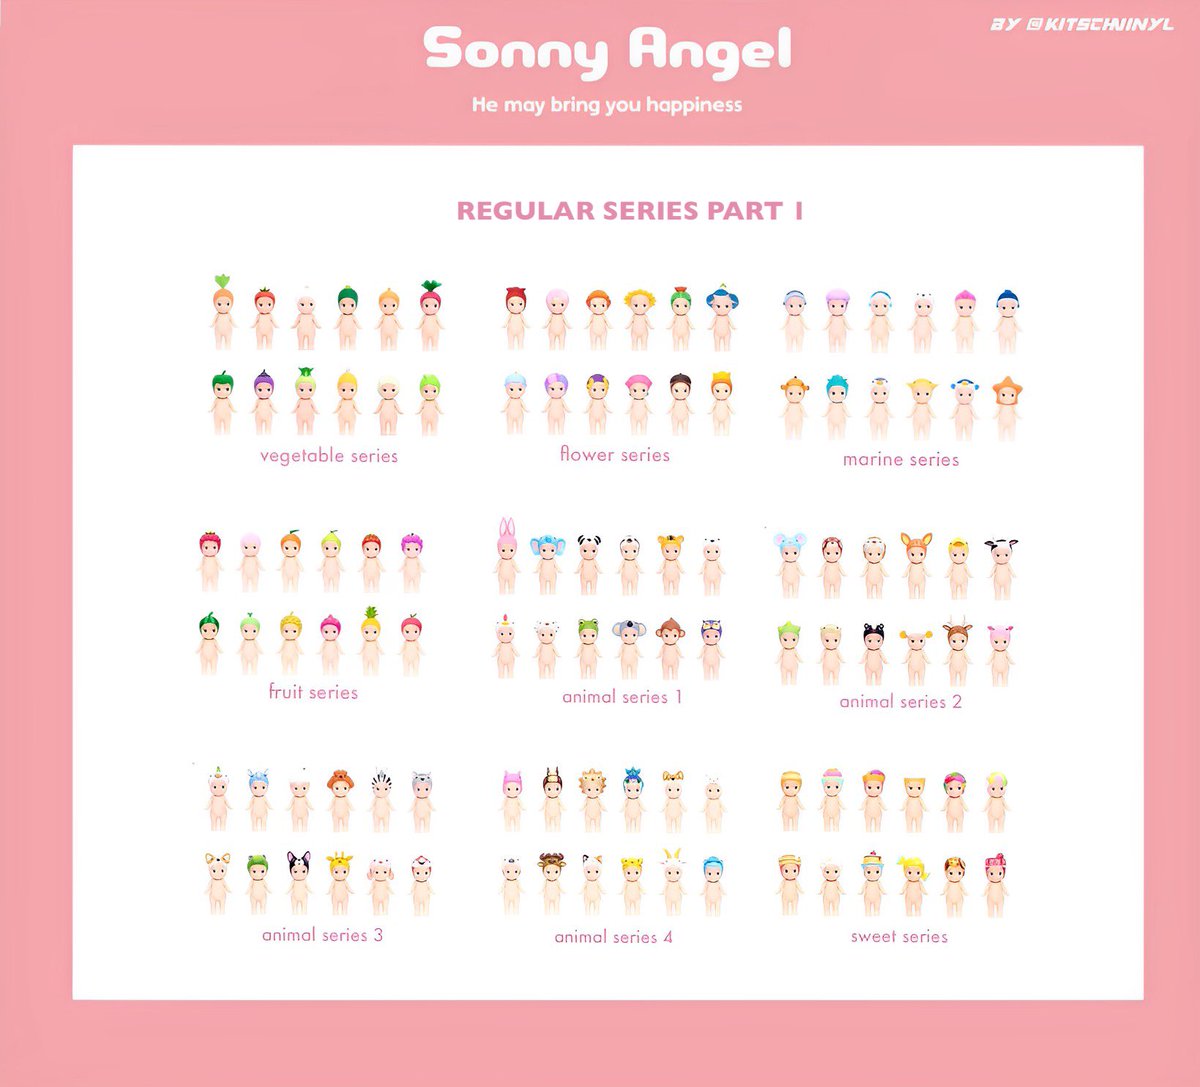 WTB LFS POP MART HIRONO AND SONNY ANGEL
(helping a friend)

•must be onhand & mint condi
•unsealed only
(May discount daw sana if bulkbuy)

# wtb lfs pop mart sonny angels the other one little mischief city or mercy mime reshape vegetable flower marine fruit animal sweet series